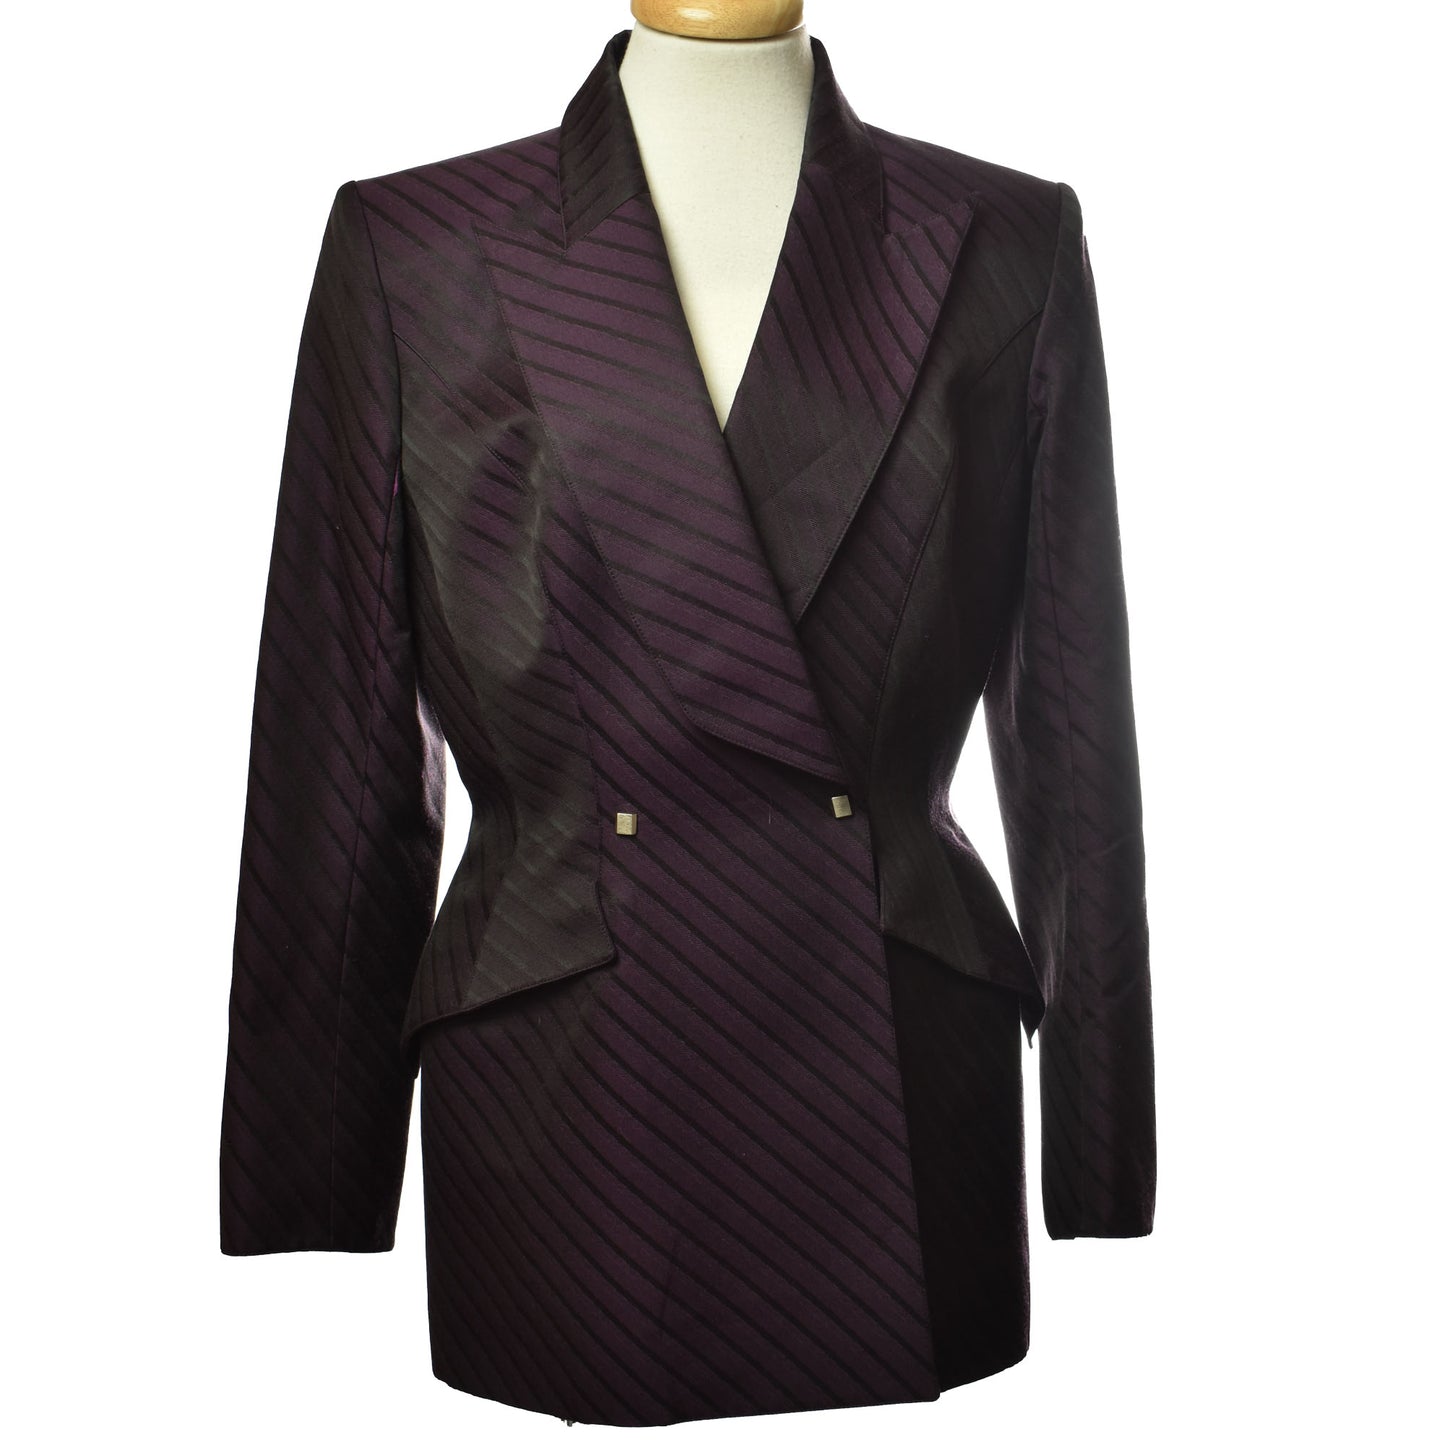 Vintage 90s/00s Thierry Mugler Couture Purple Striped Shawl Collar Flap Pockets Button Closure Blazer - Made in France - Size 42